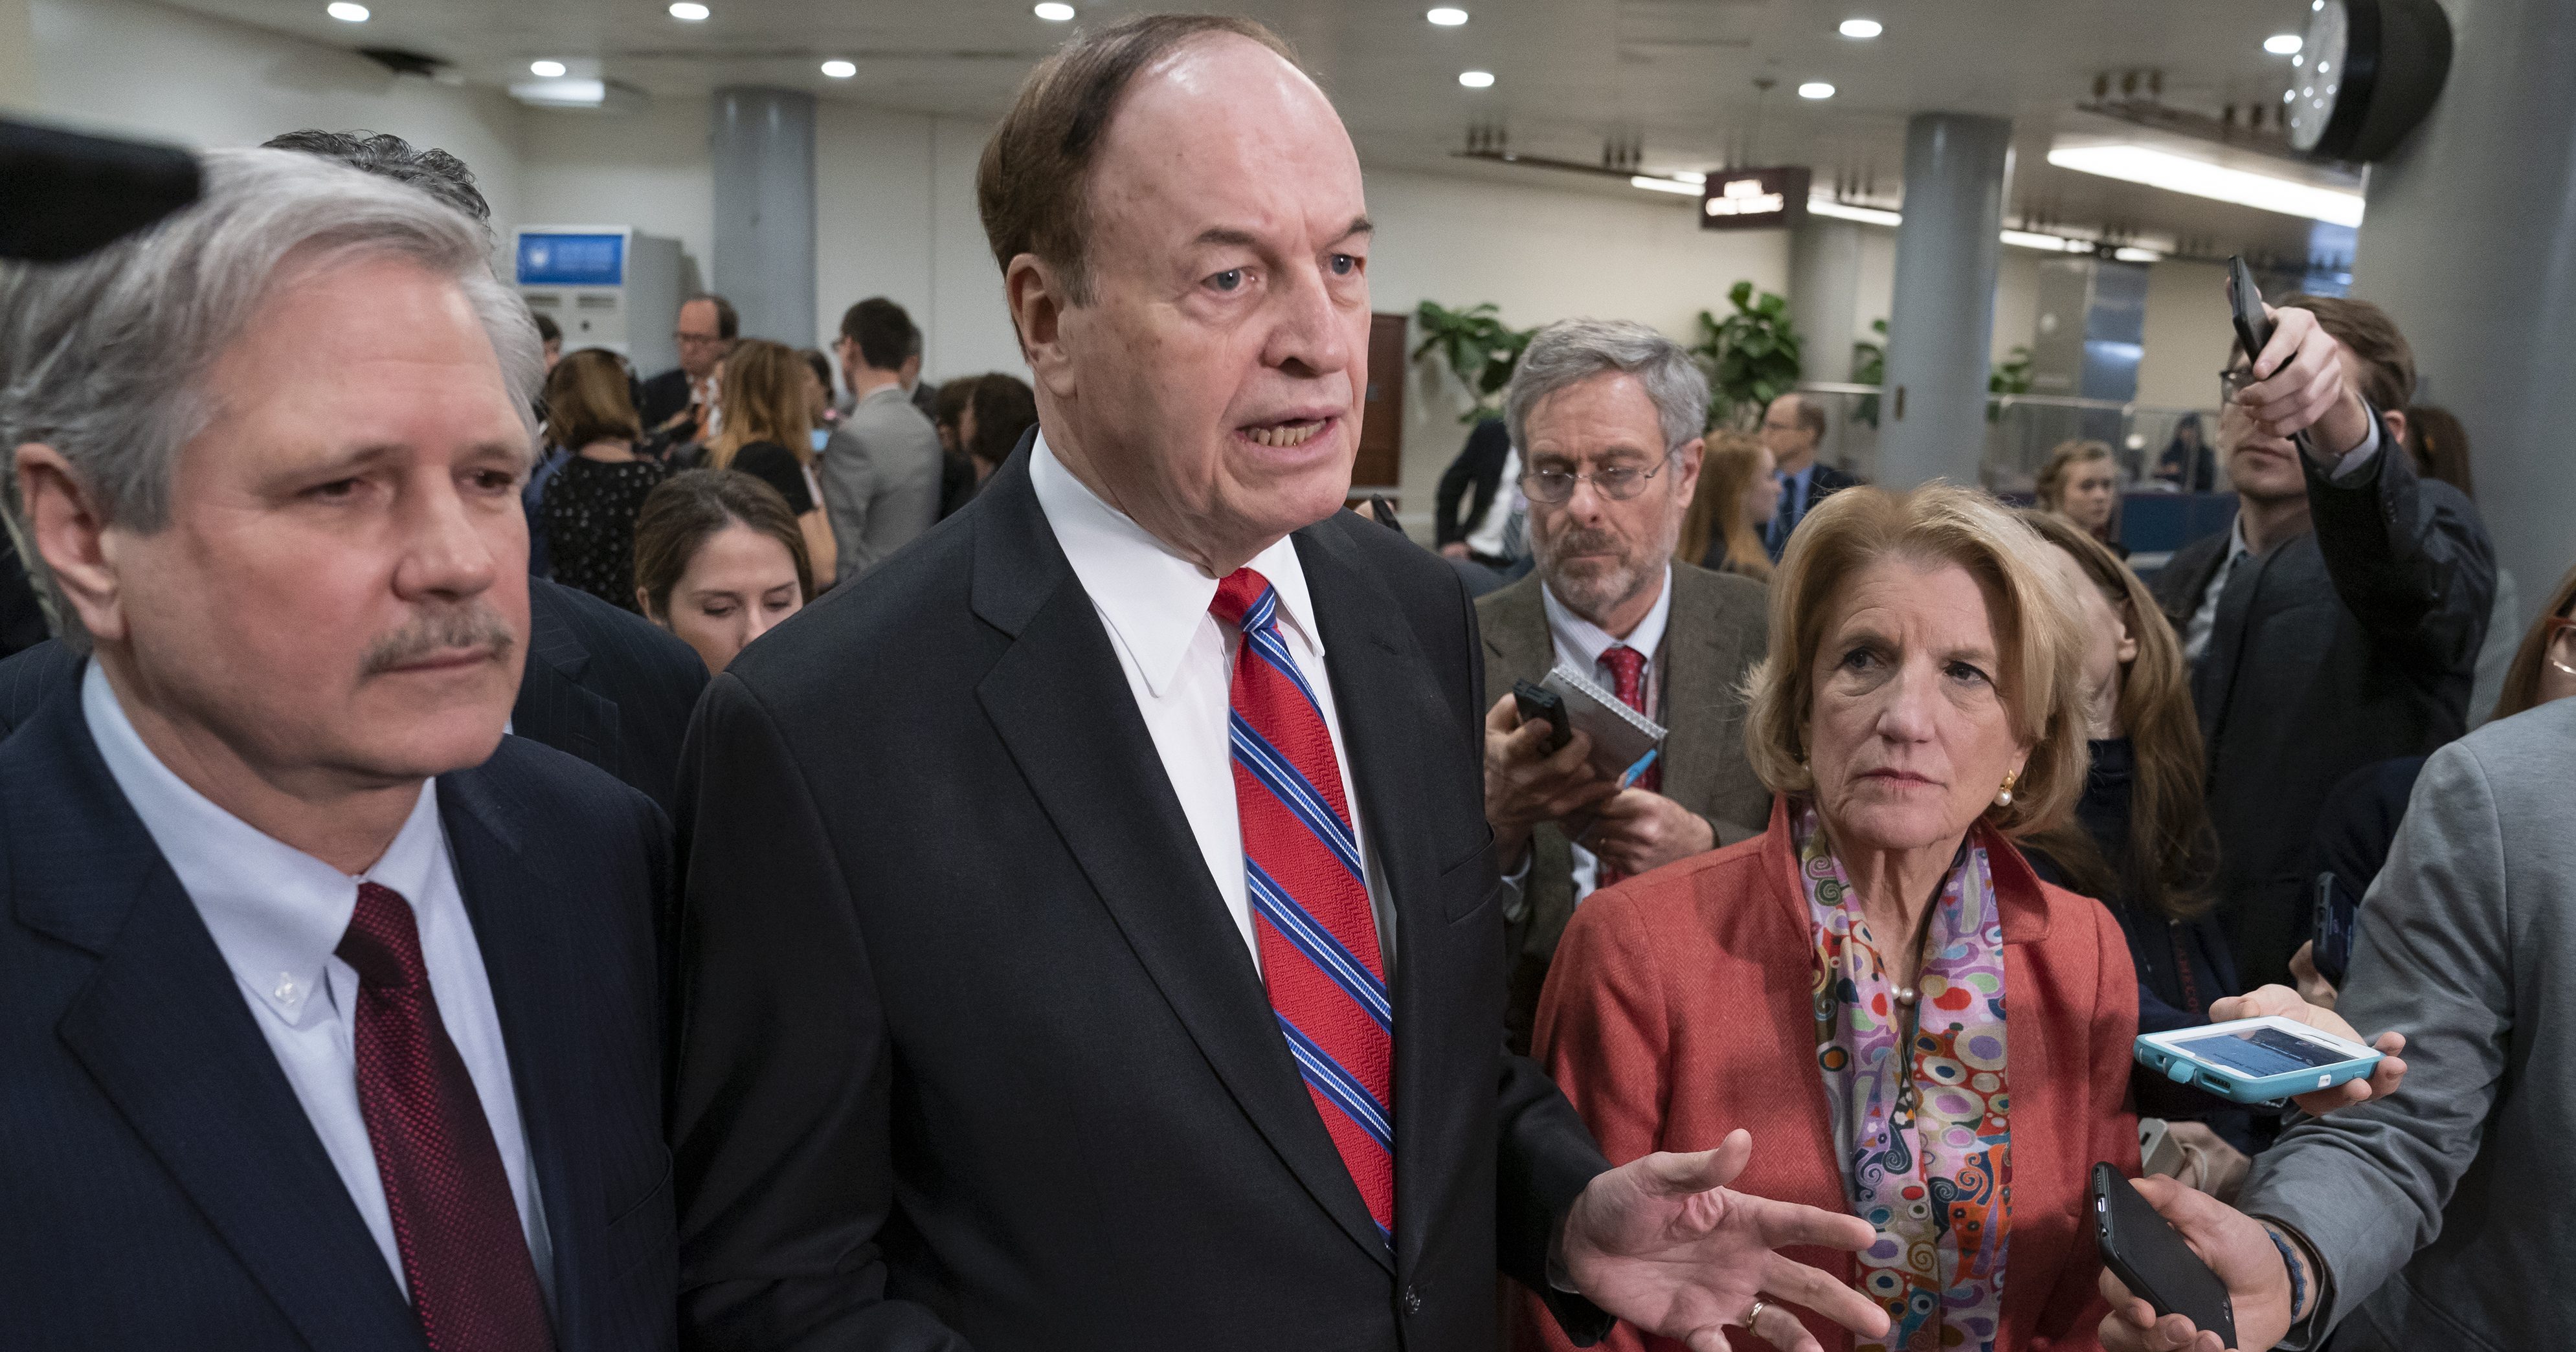 Sen. Richard Shelby, R-Ala., the top Republican on the bipartisan group working to craft a border security compromise in hope of avoiding another government shutdown, is joined by Sen. John Hoeven, R-N.D., left, and Sen. Shelley Moore Capito, R-W.Va., right, as they speak with reporters in Washington on Wednesday.